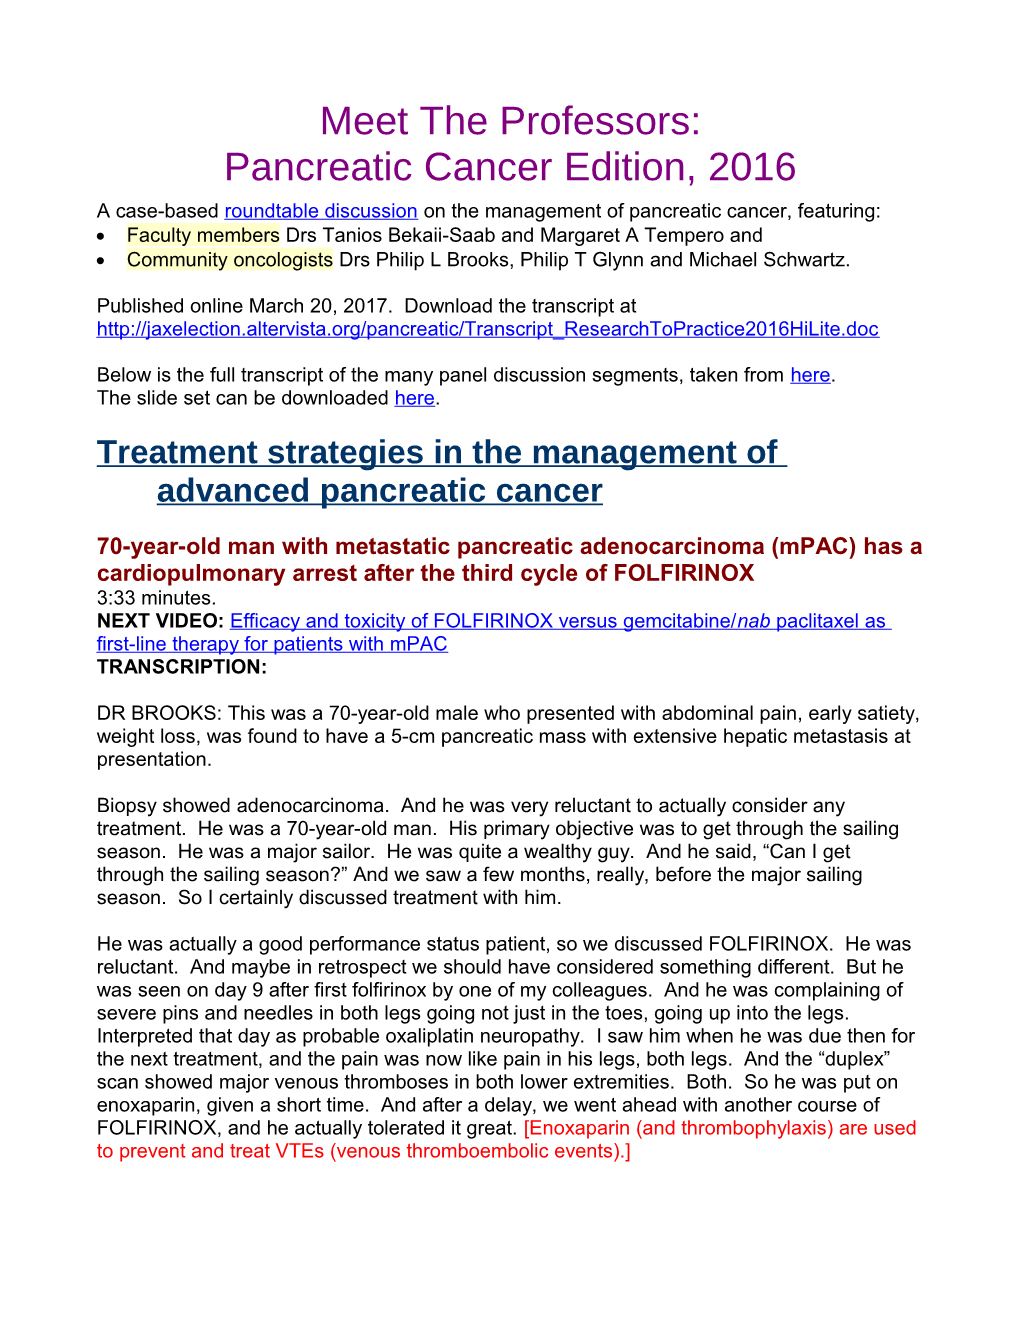 A Case-Based Roundtable Discussion on the Management of Pancreatic Cancer, Featuring